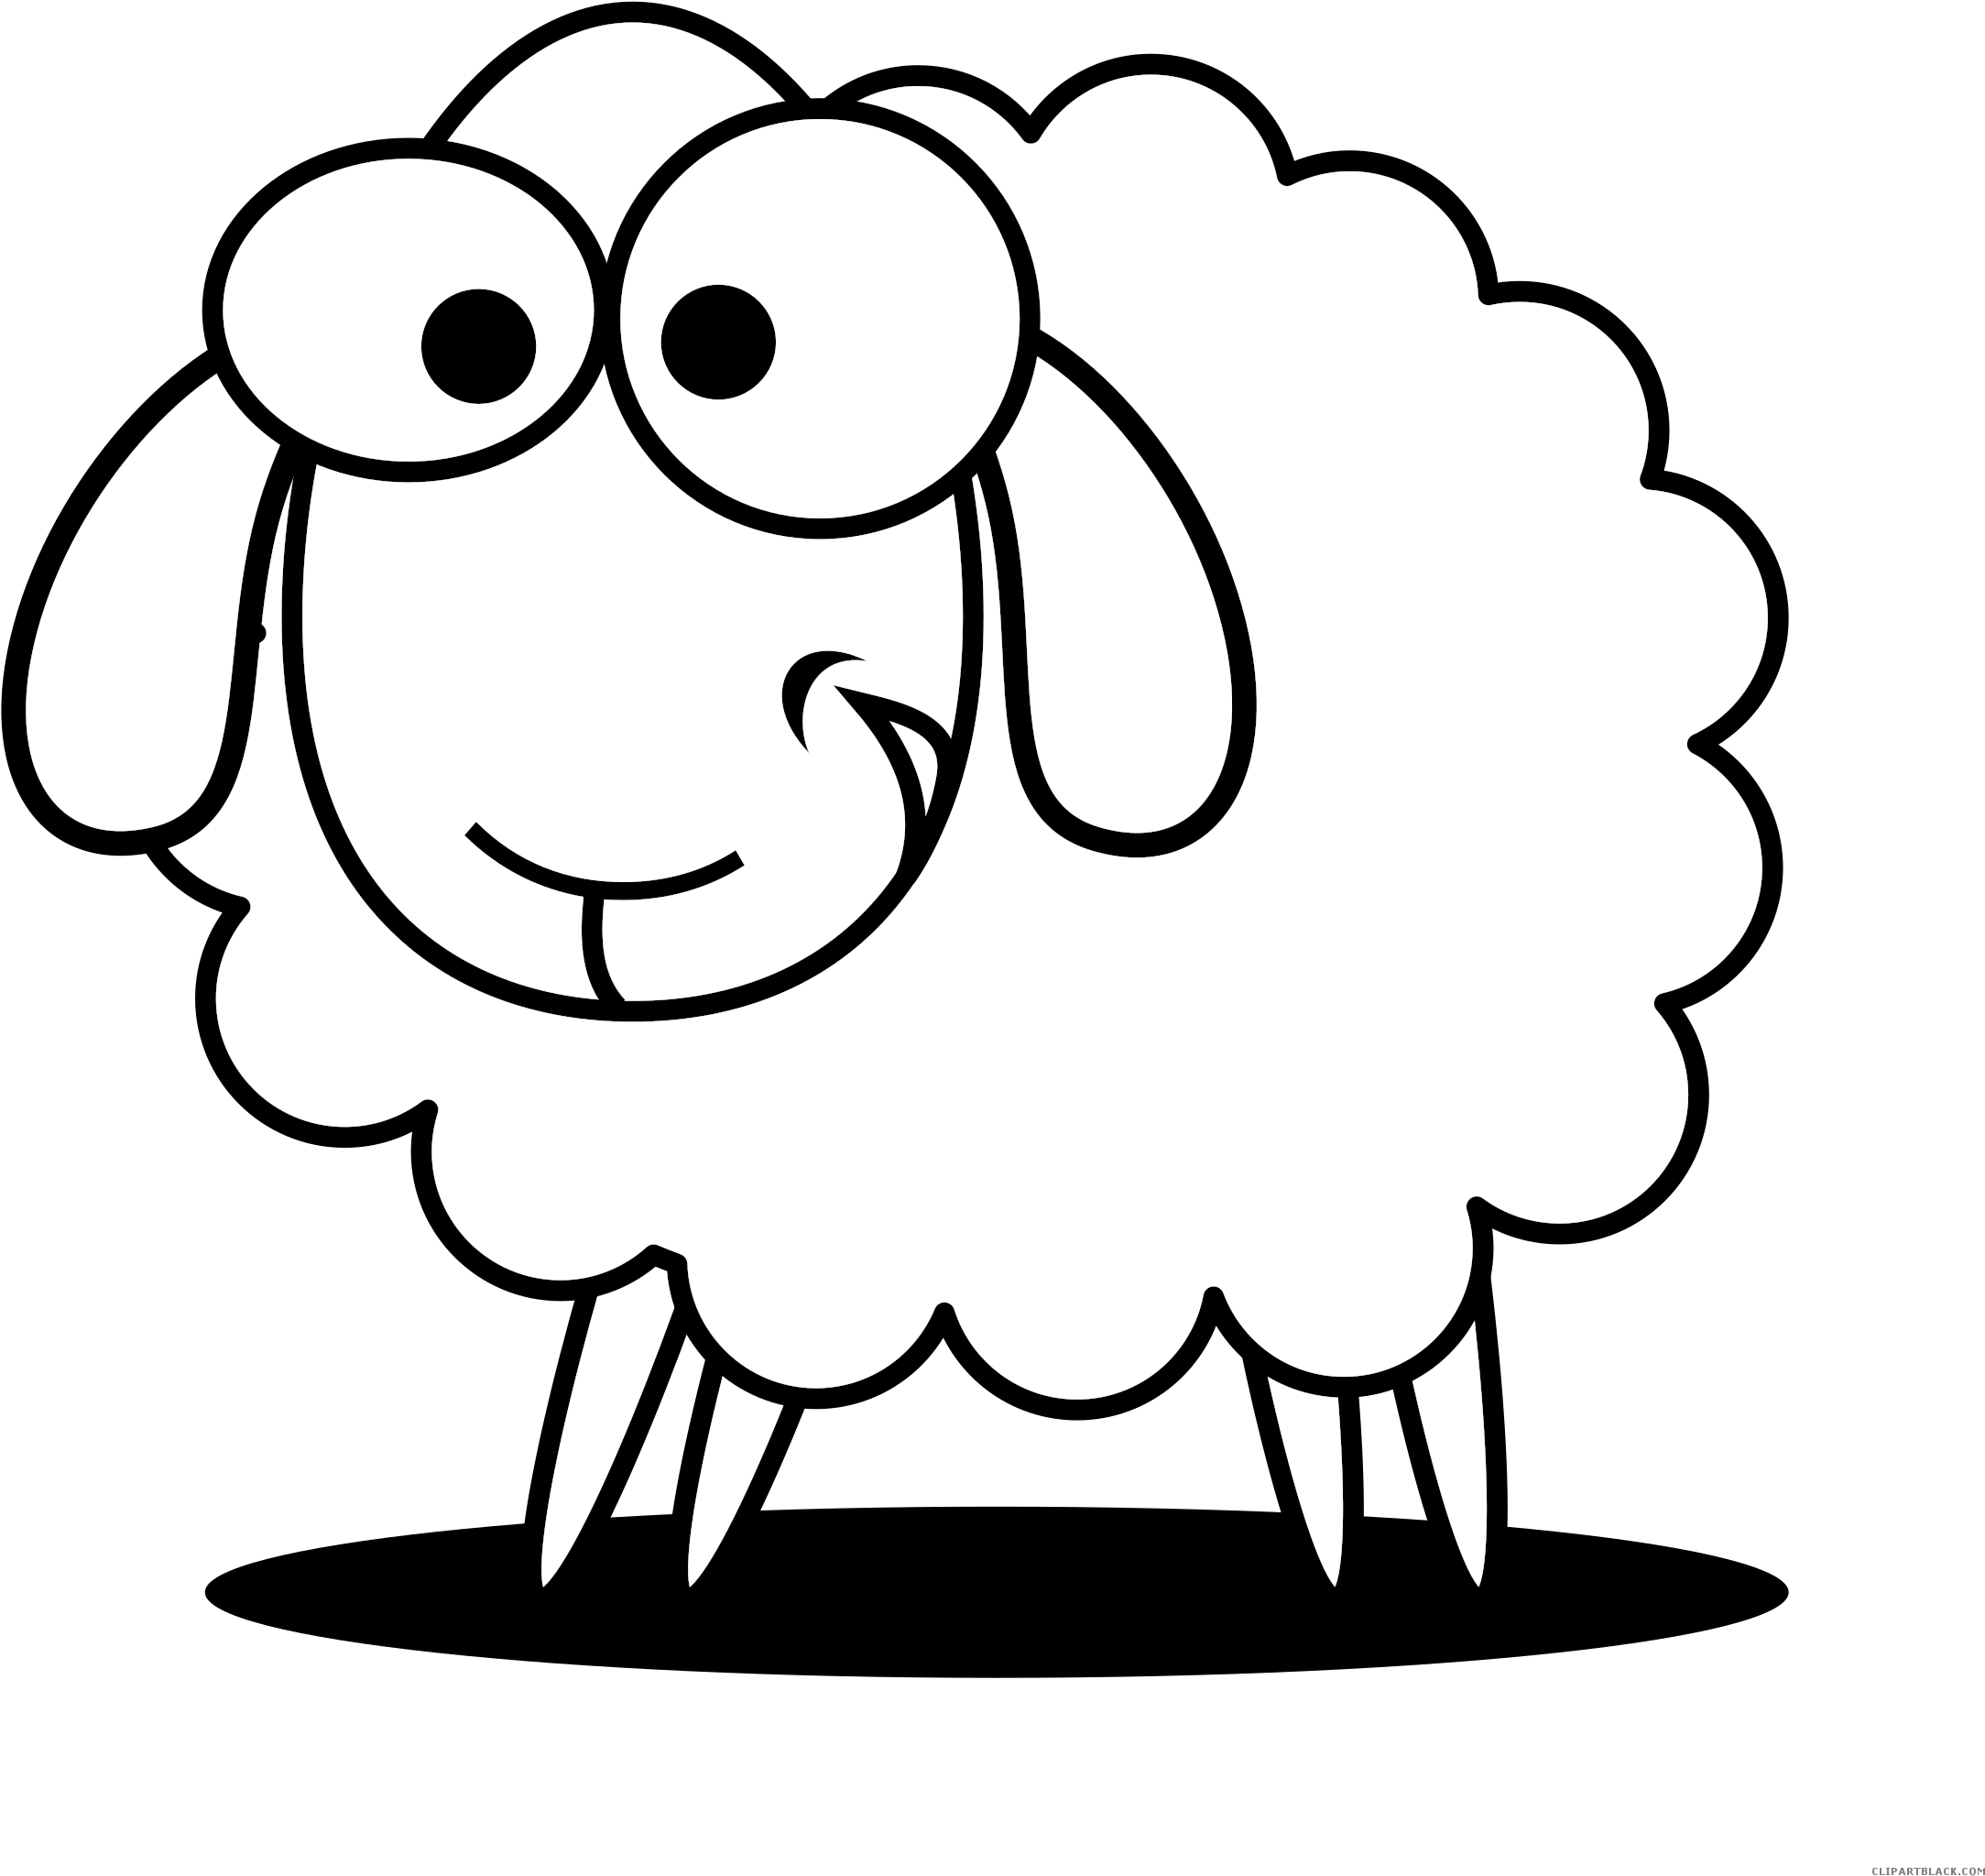 Sheep Outline Animal Free Black White Clipart Images - Sheep Black And White (2400x2385)